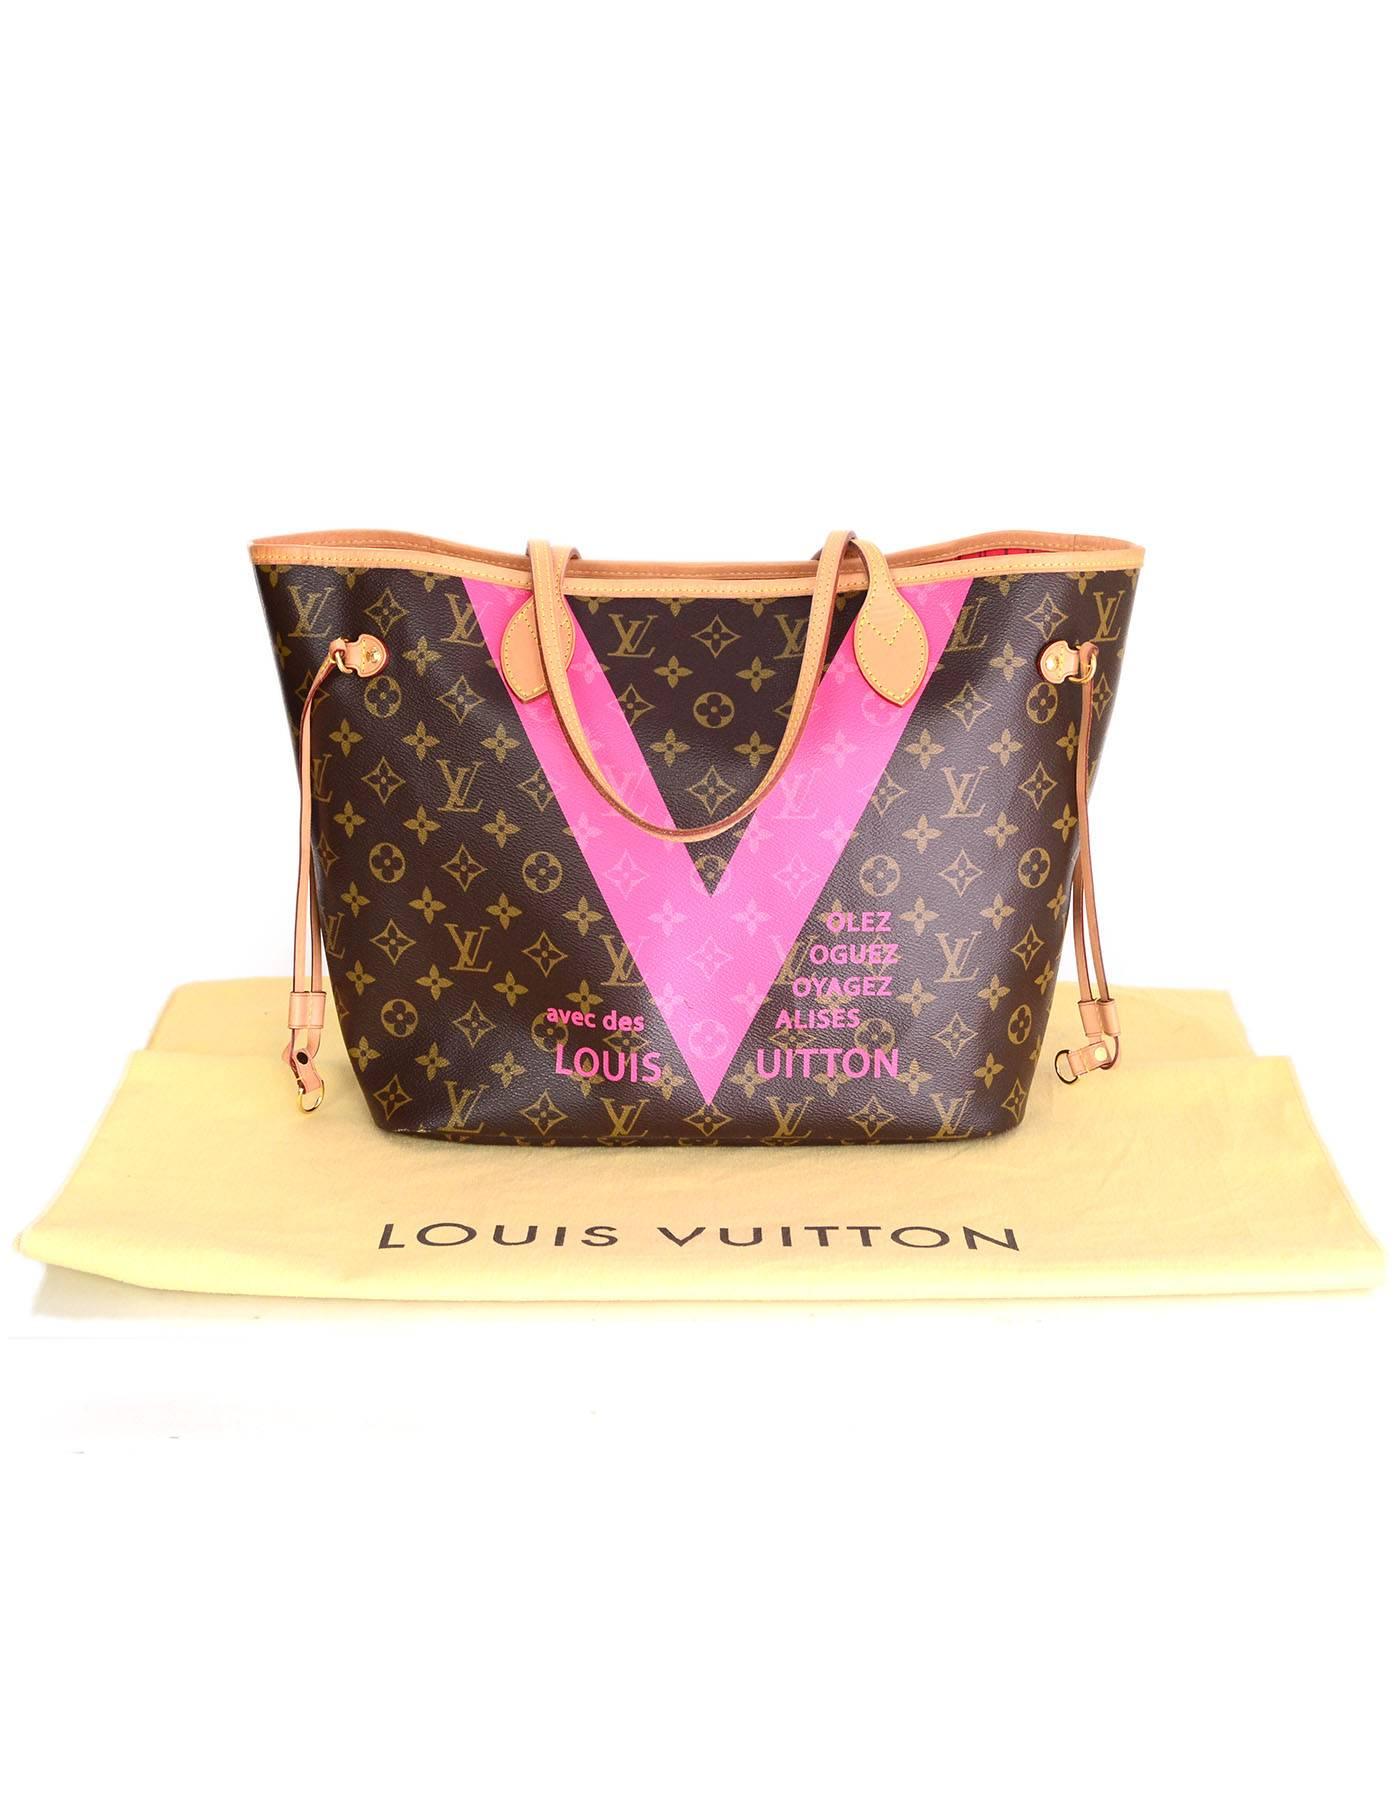 Louis Vuitton Limited Edition 2015 Grenade Monogram V Neverfull MM Tote Bag  2